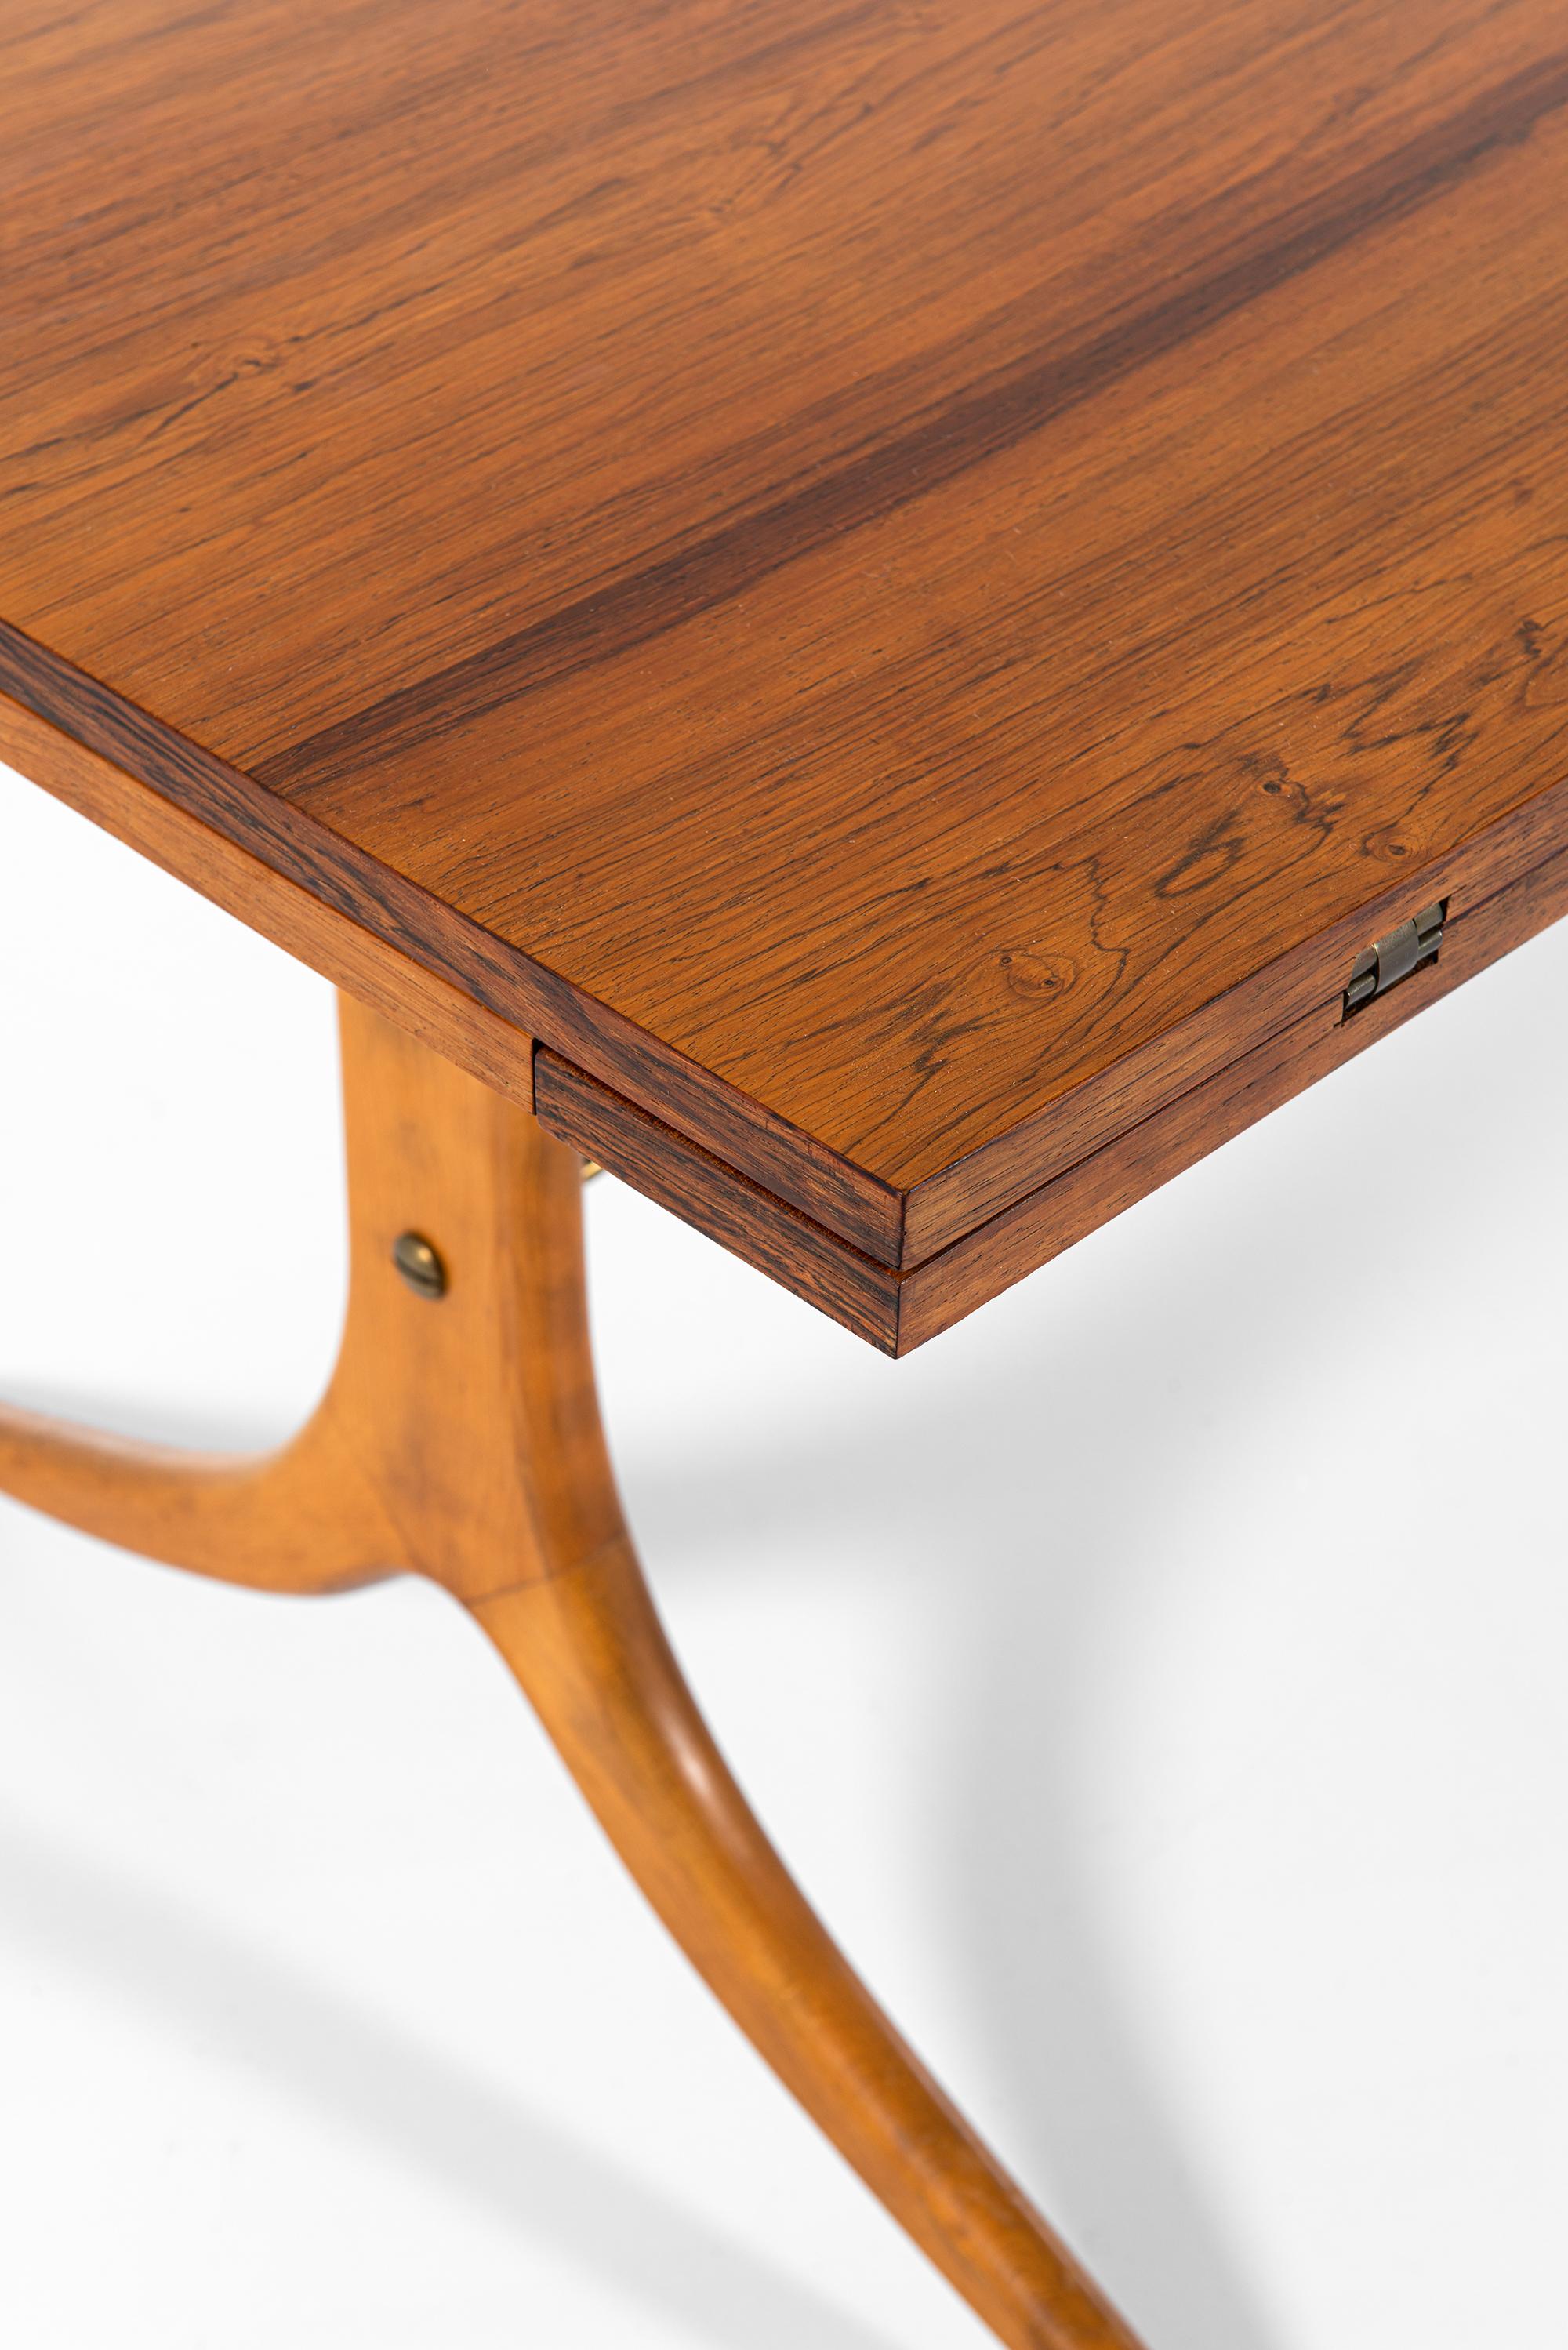 Mid-20th Century Dining Table Attributed to David Rosén Produced in Sweden